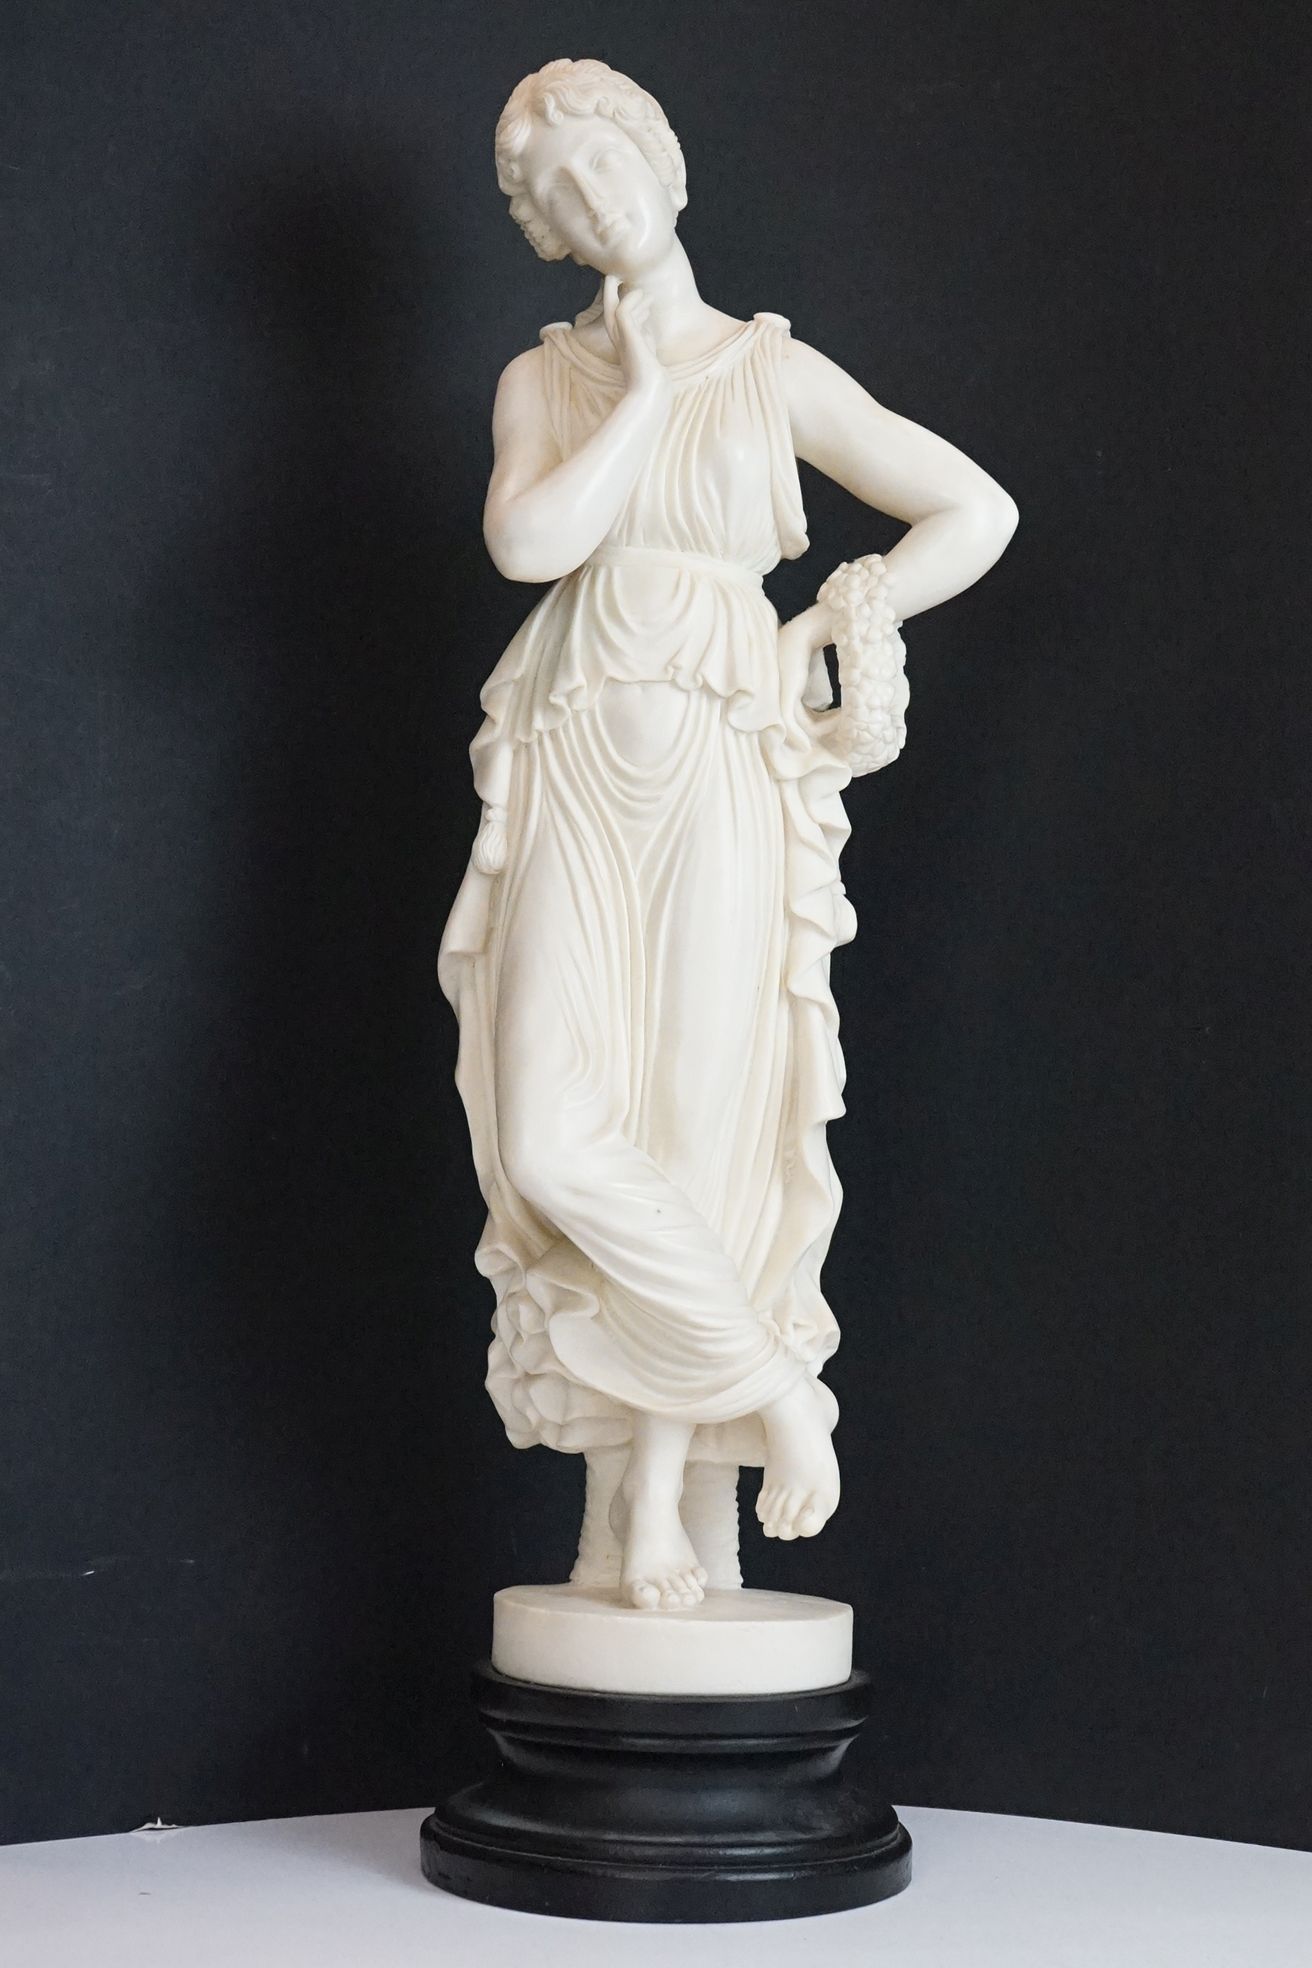 Resin sculpture of a classical maiden, in a pensive pose, raised on a wooden pedestal base. Measures